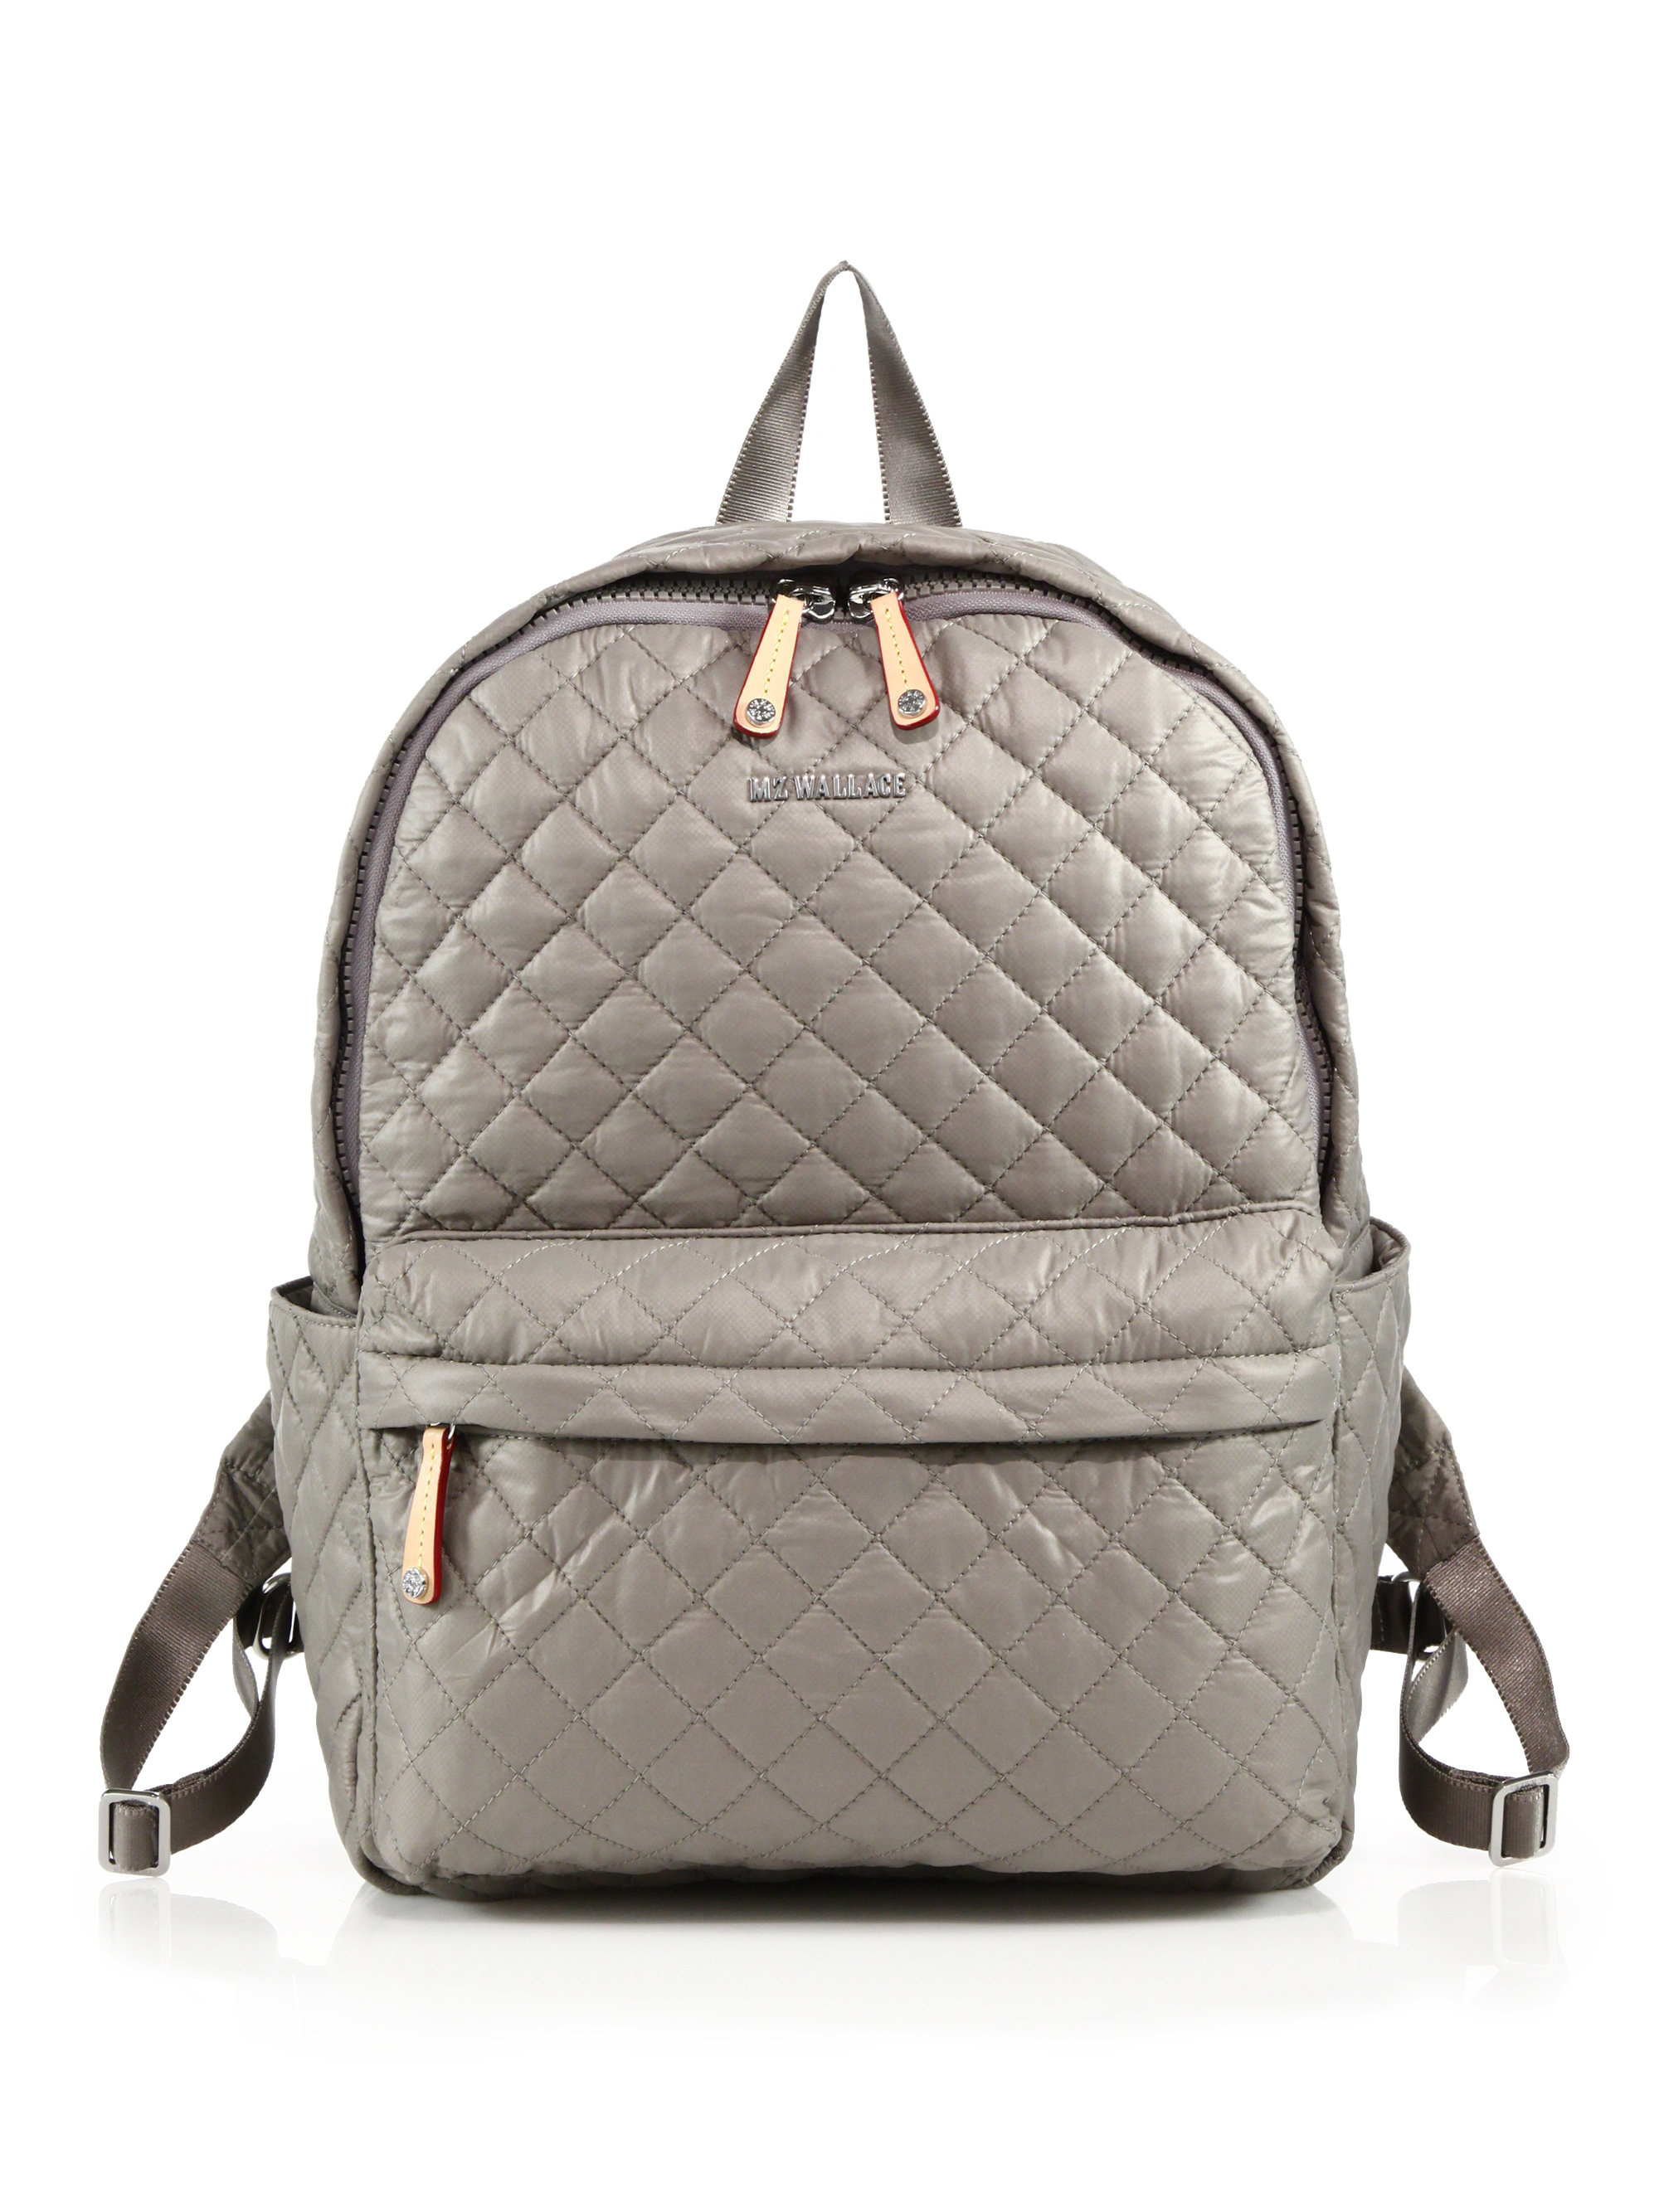 Lyst - Mz Wallace Oxford Quilted Backpack in Gray